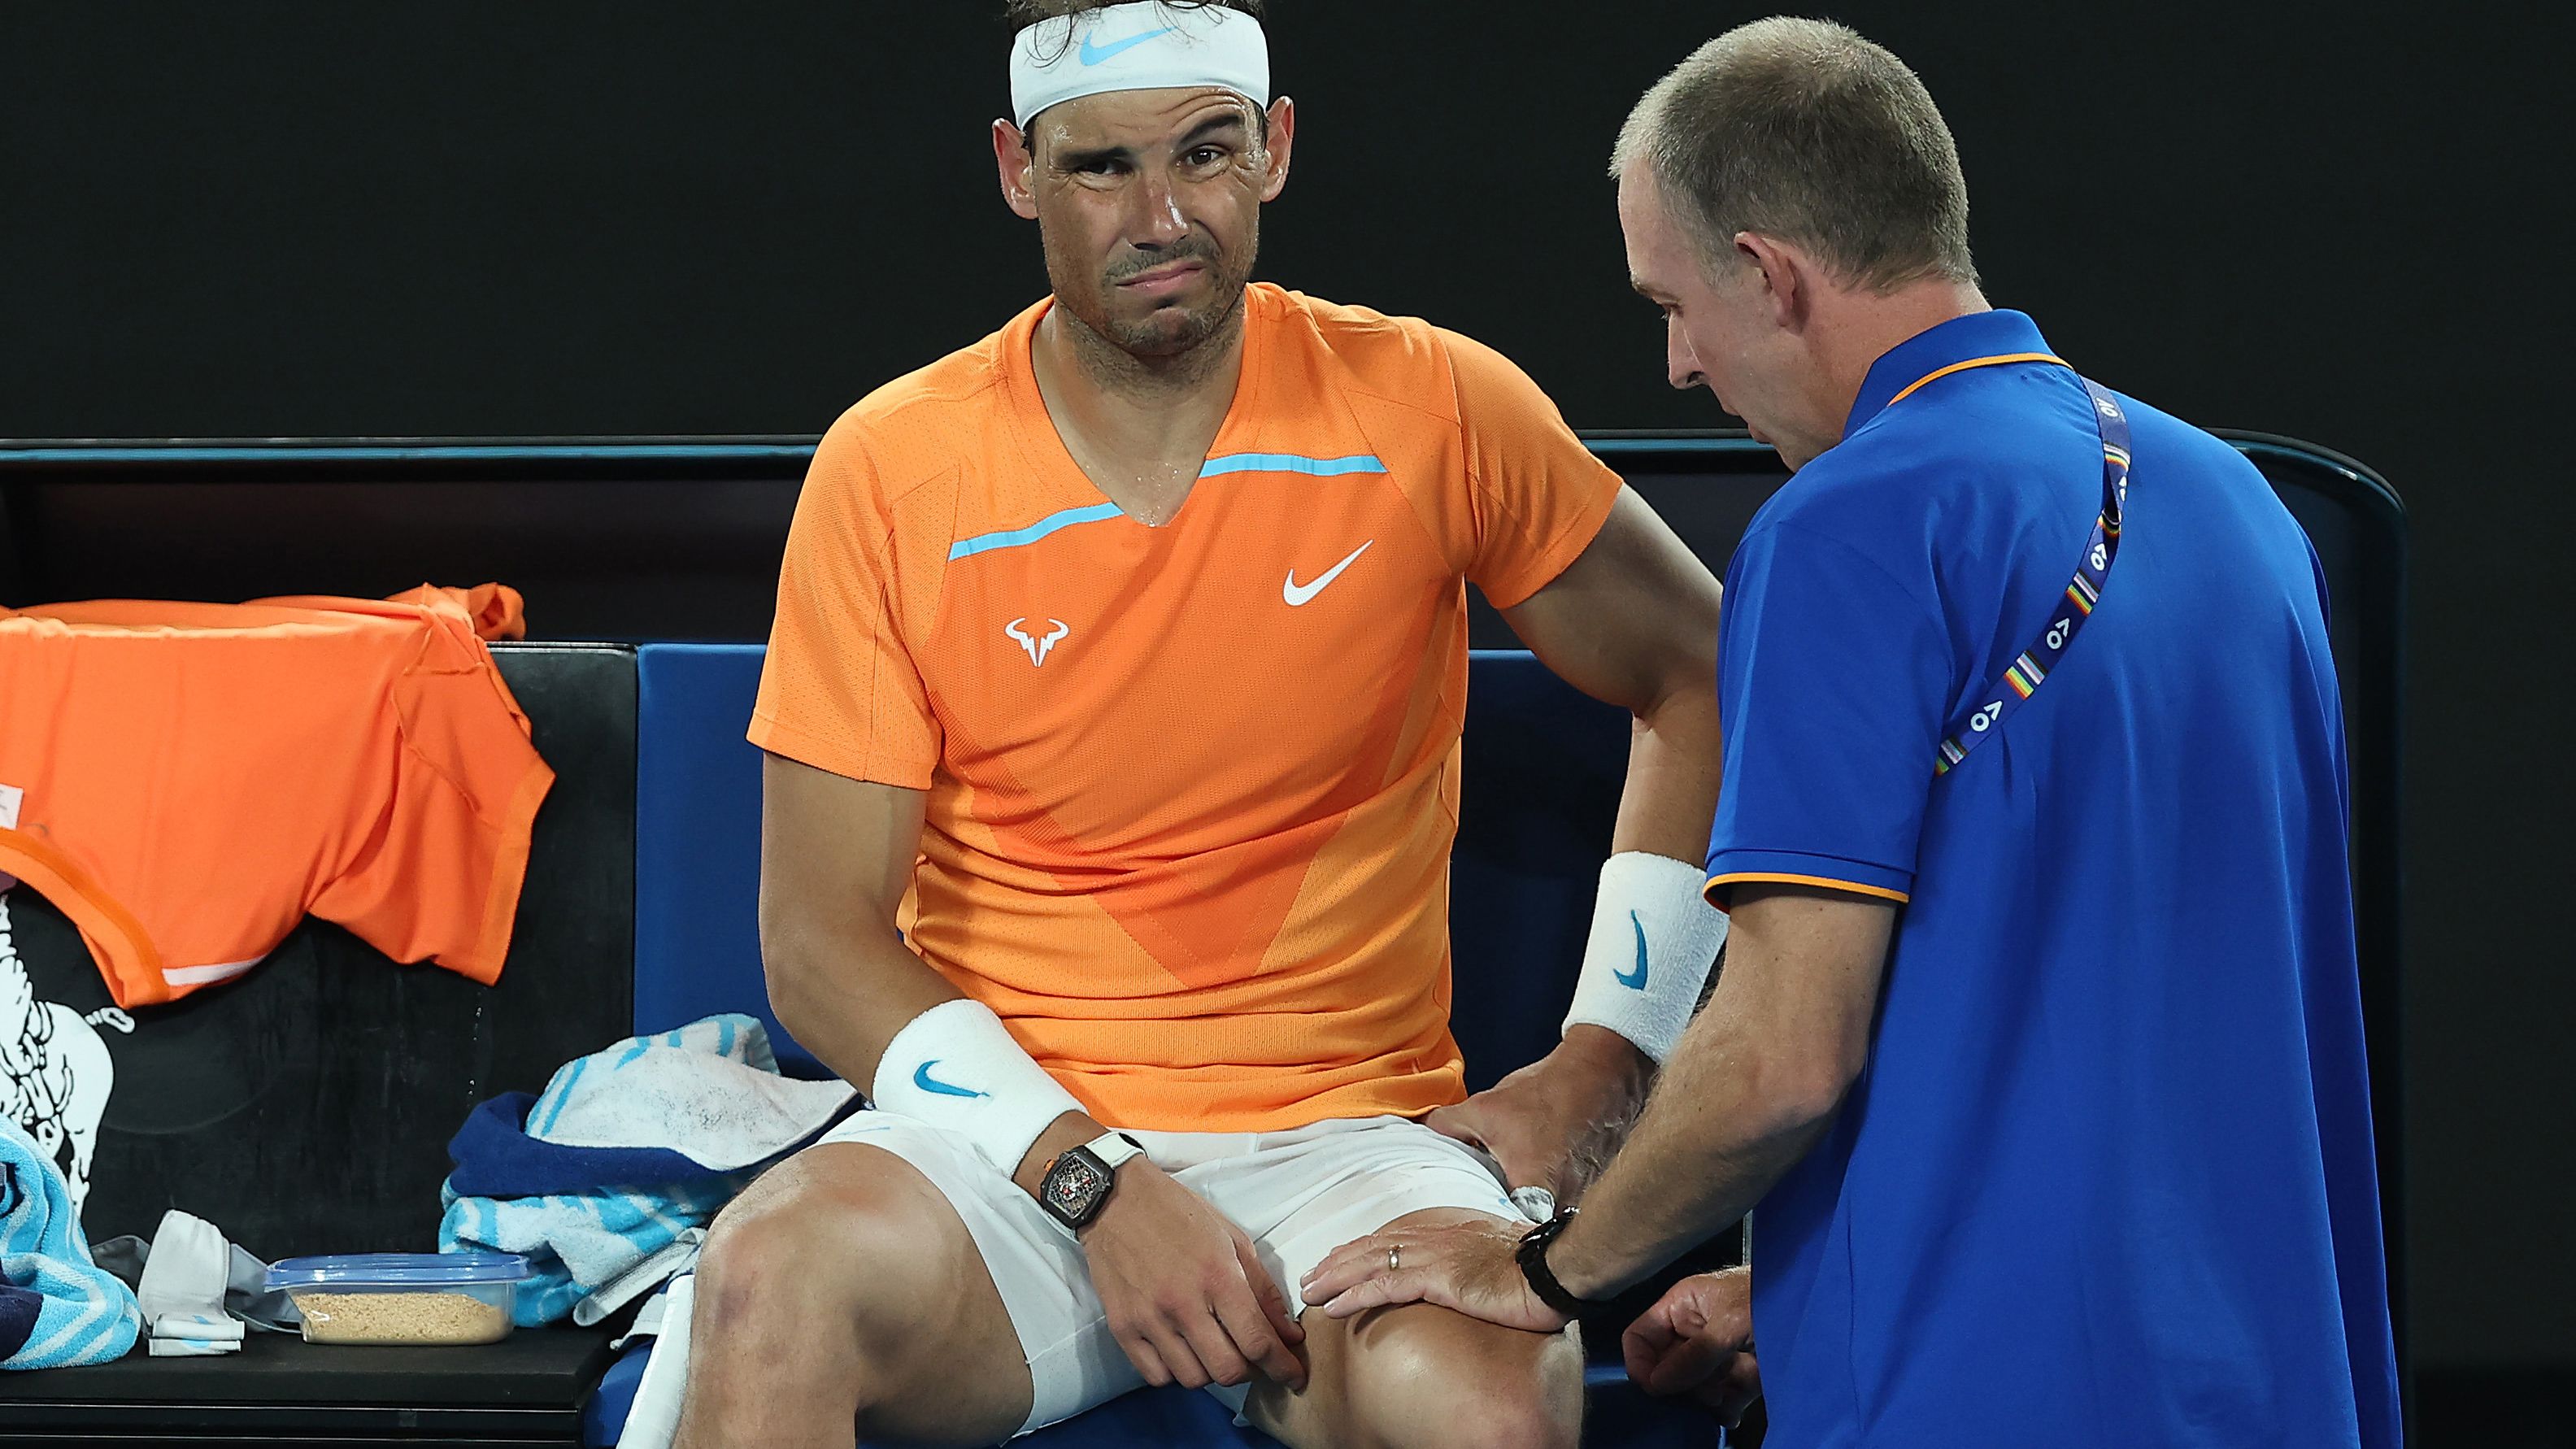 Rafael Nadal of Spain receives attention during a medical time out against Mackenzie McDonald of the United States. (Photo by Cameron Spencer/Getty Images)